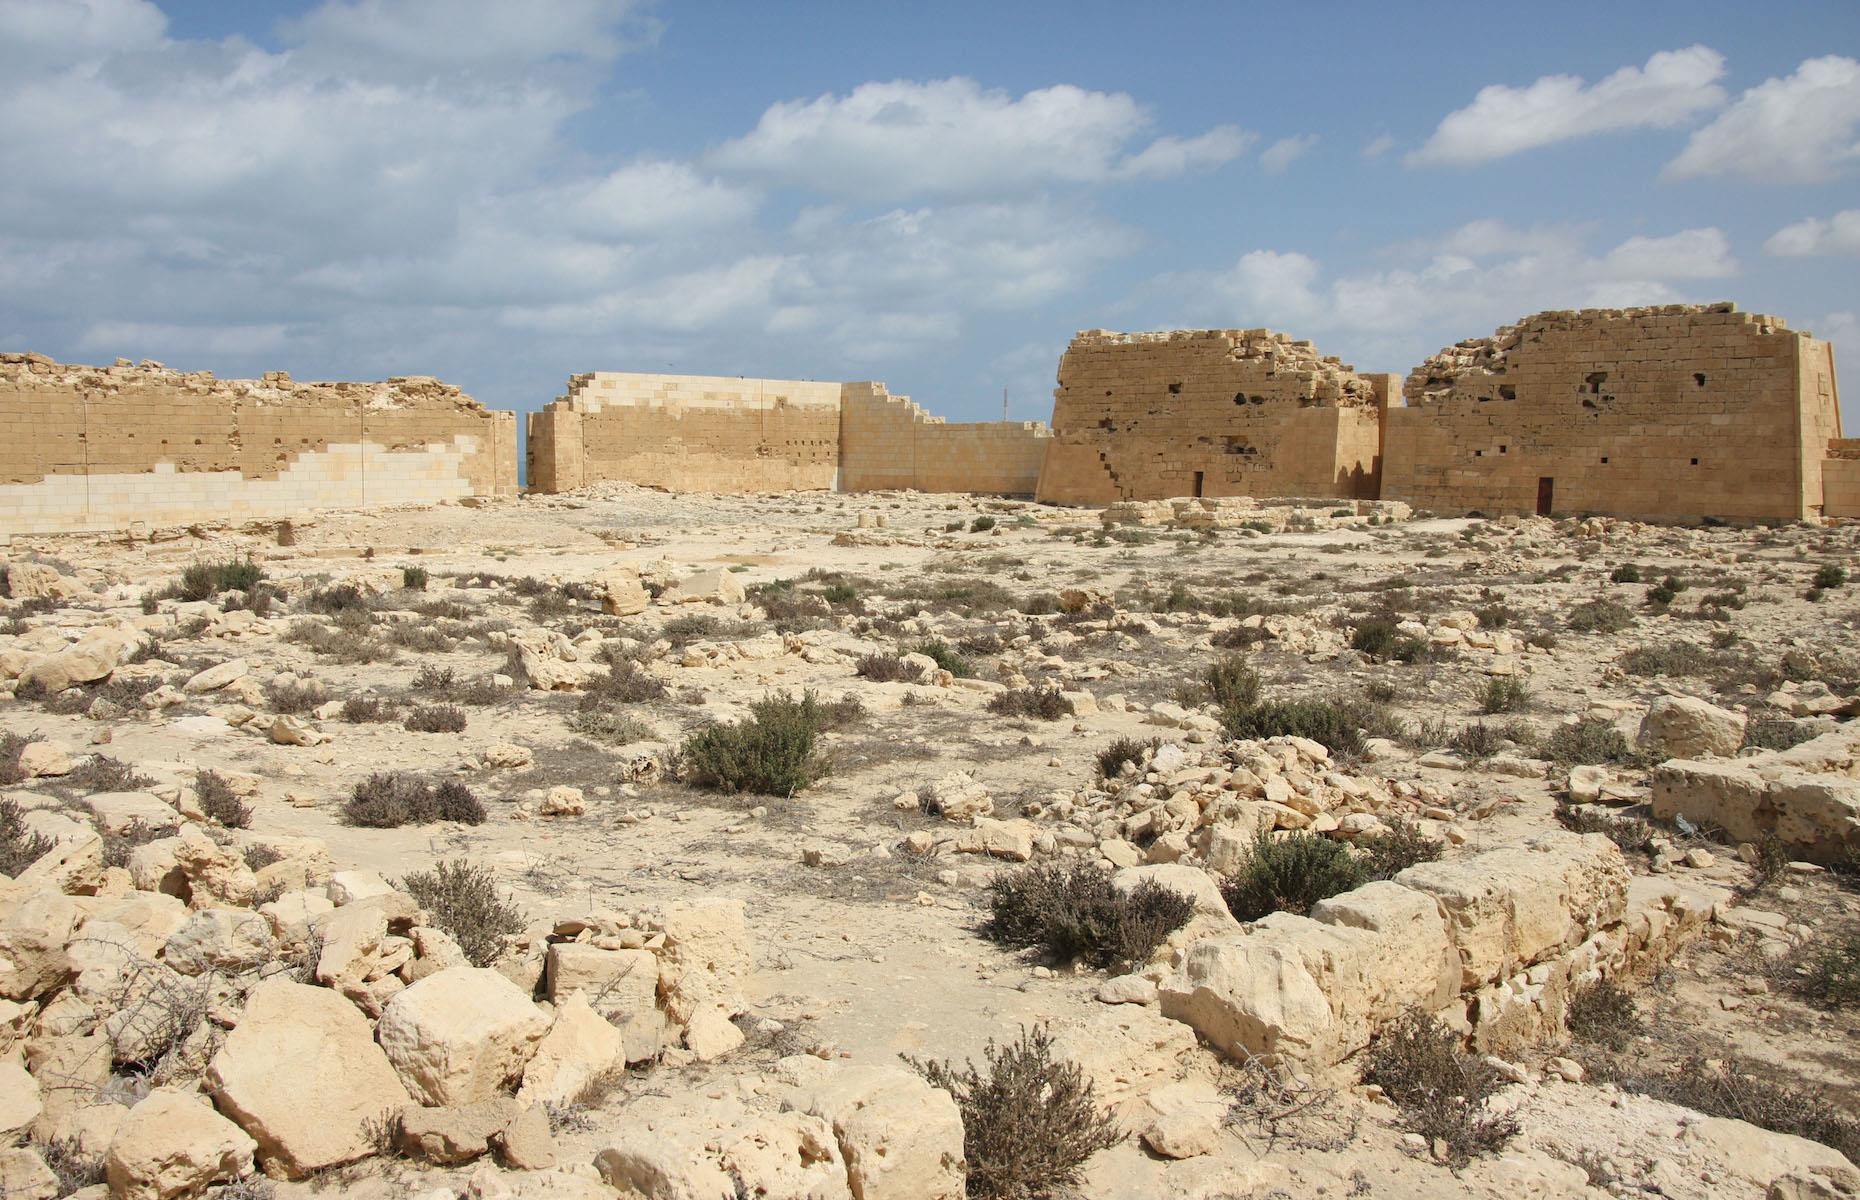 <p>In the stuff of treasure hunters’ dreams, archaeologists working at a burial site at the Taposiris Magna Temple (pictured) near Alexandria <a href="https://www.bbc.co.uk/news/world-middle-east-55902631">unearthed ancient mummies with golden tongues</a>, in February 2021. The 2,000-year-old mummies were discovered in 16 burial shafts dating from the Greek and Roman era. Amulets of gold foil, shaped in the form of a tongue, were apparently placed in the mouths of the dead to help them speak to the court of Osiris in the afterlife. A woman’s funeral mask was also found.</p>  <p><a href="https://www.loveexploring.com/galleries/90974/the-worlds-amazing-lost-cities-recently-rediscovered?page=1"><strong>Now check out the world's amazing lost cities that we've only just discovered</strong></a></p>